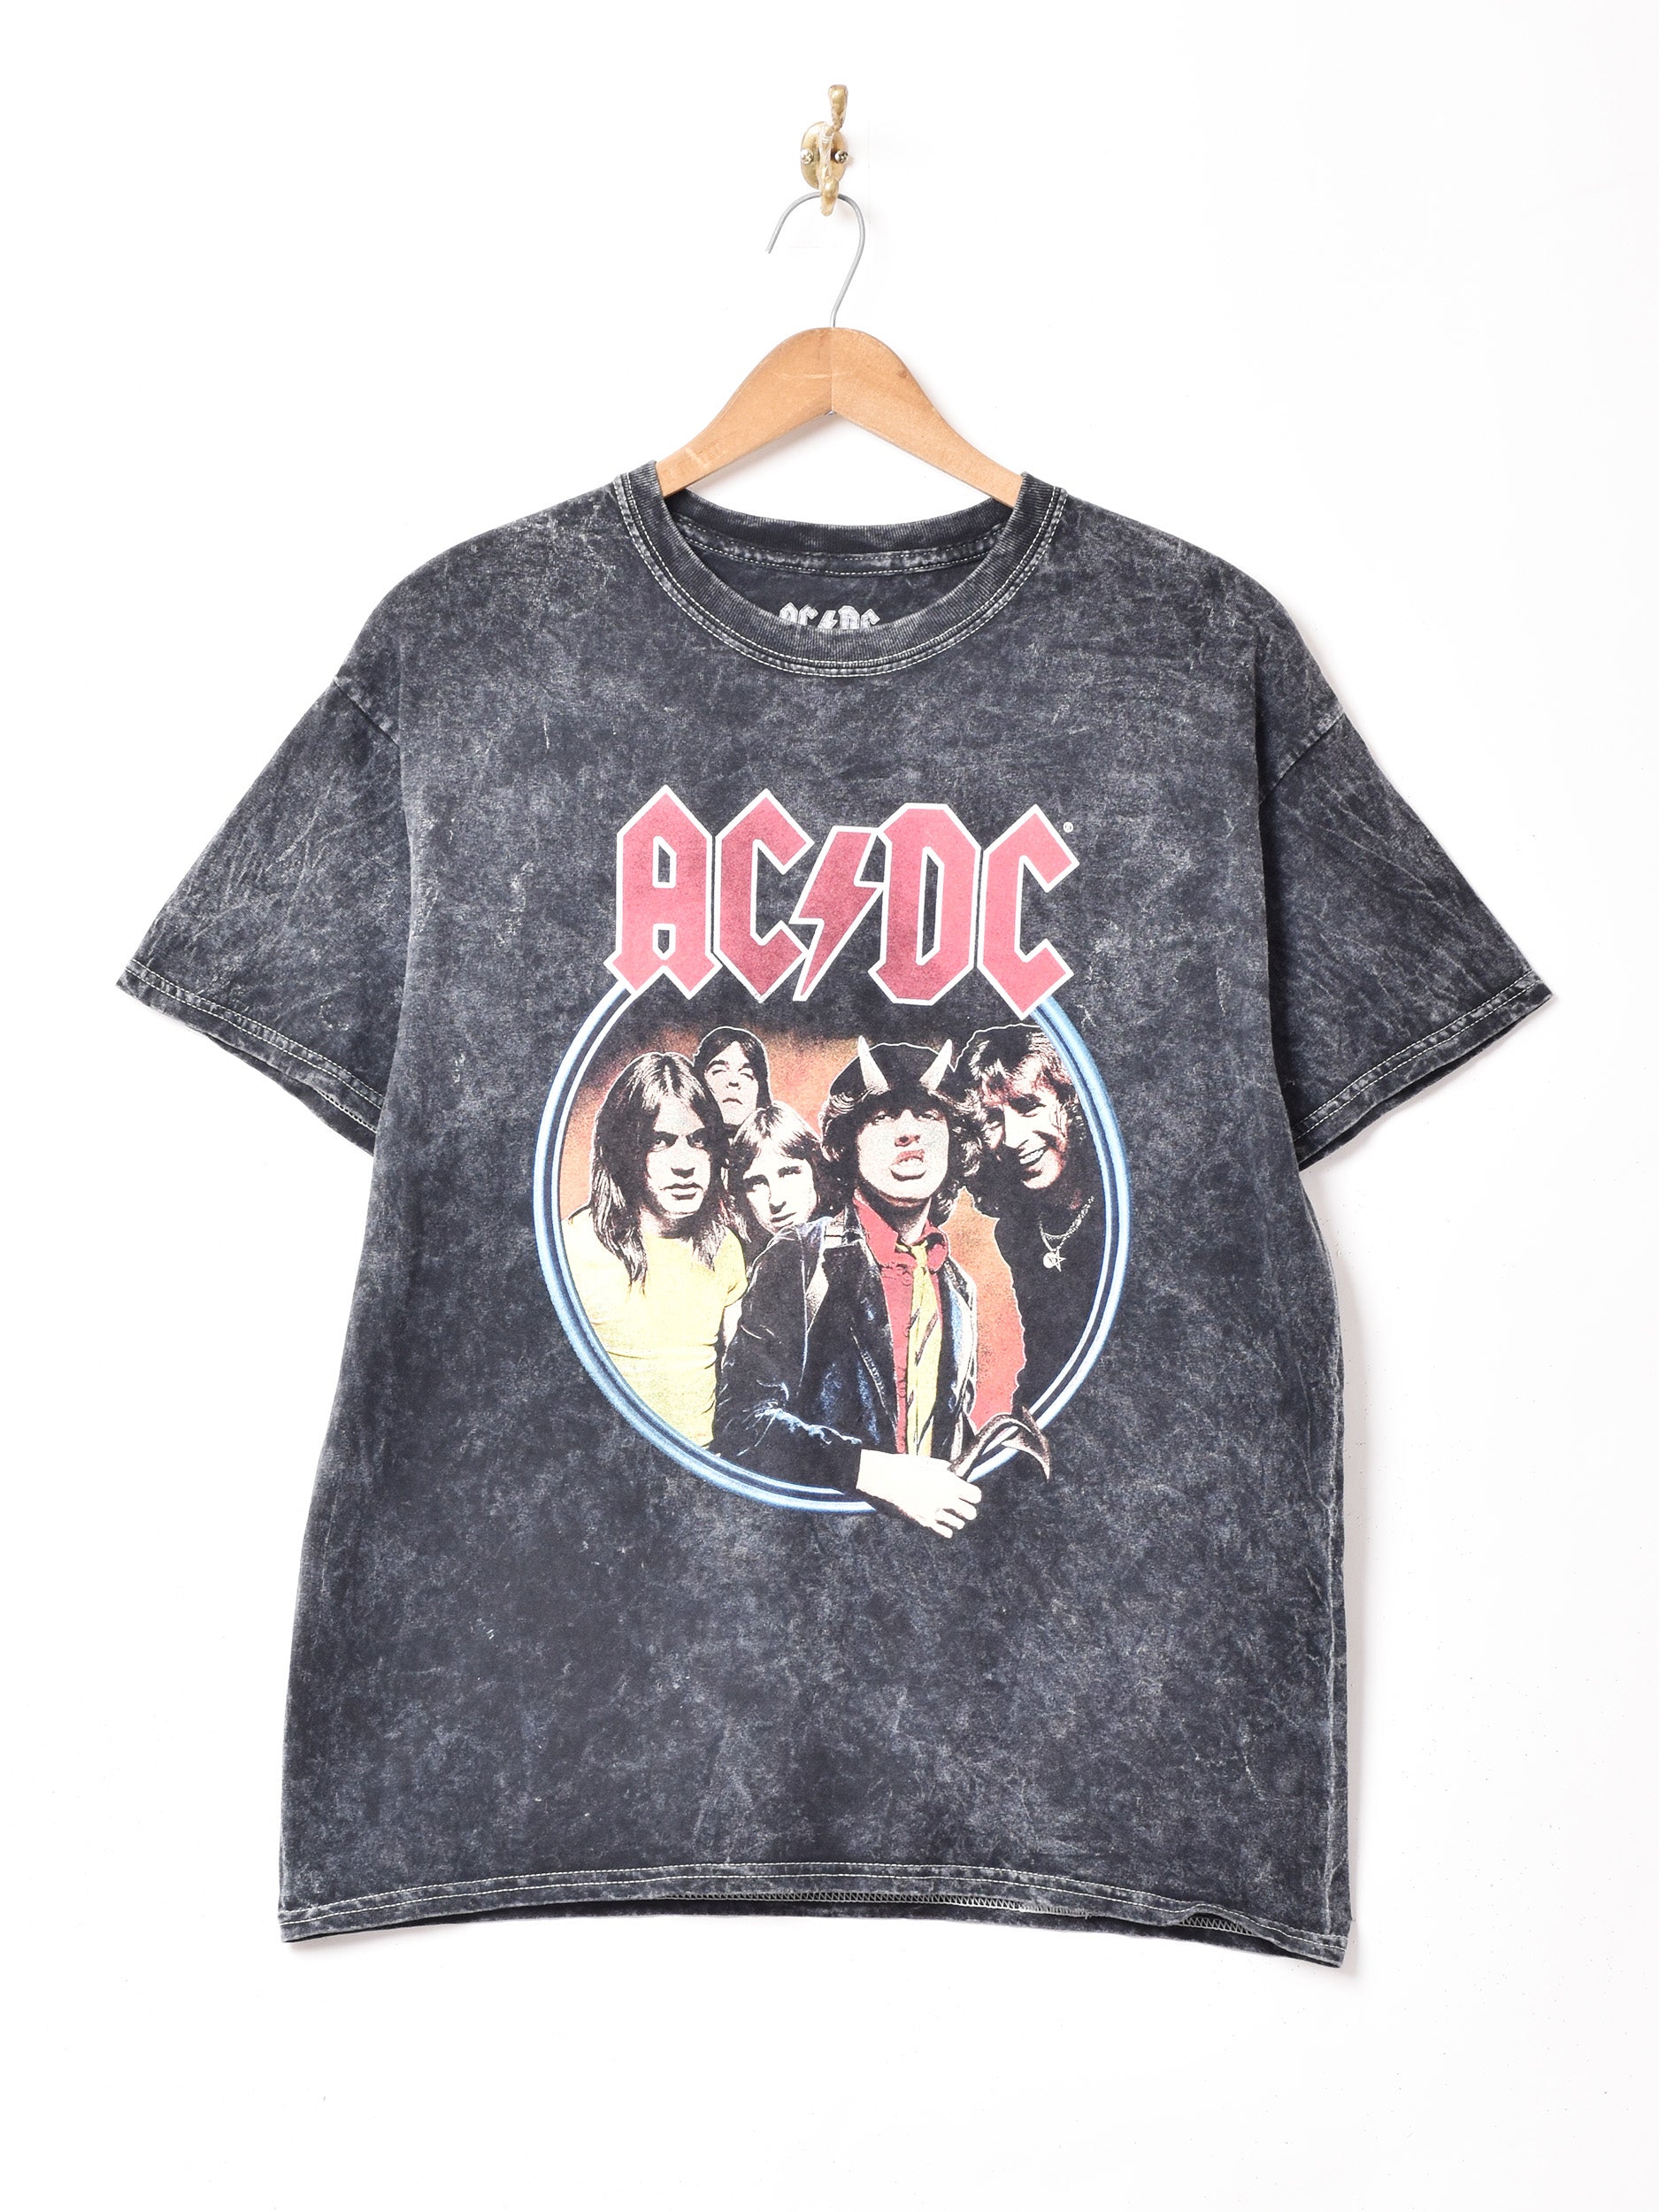 ACDC ツアーTシャツ – 古着屋Top of the Hillのネット通販サイト